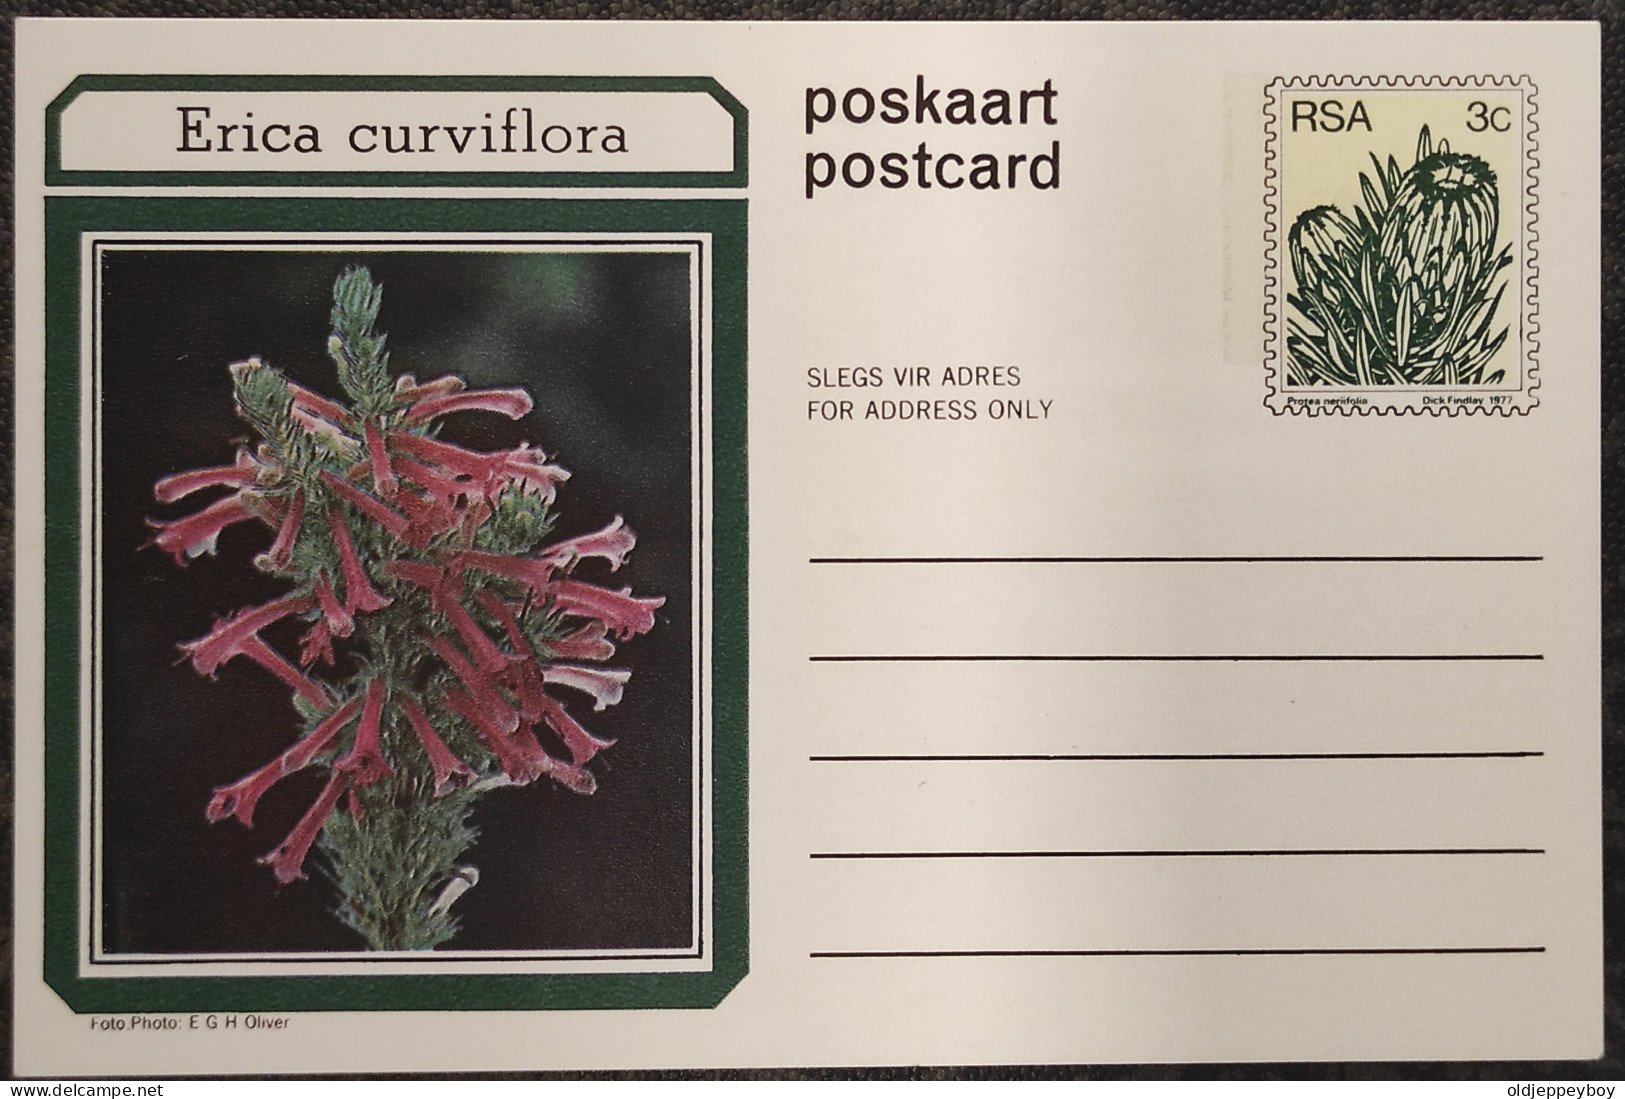 3c SOUTH AFRICA Postal STATIONERY CARD Illus ERICA CURVIFLORA FLOWER Cover Stamps Flowers Rsa - Brieven En Documenten